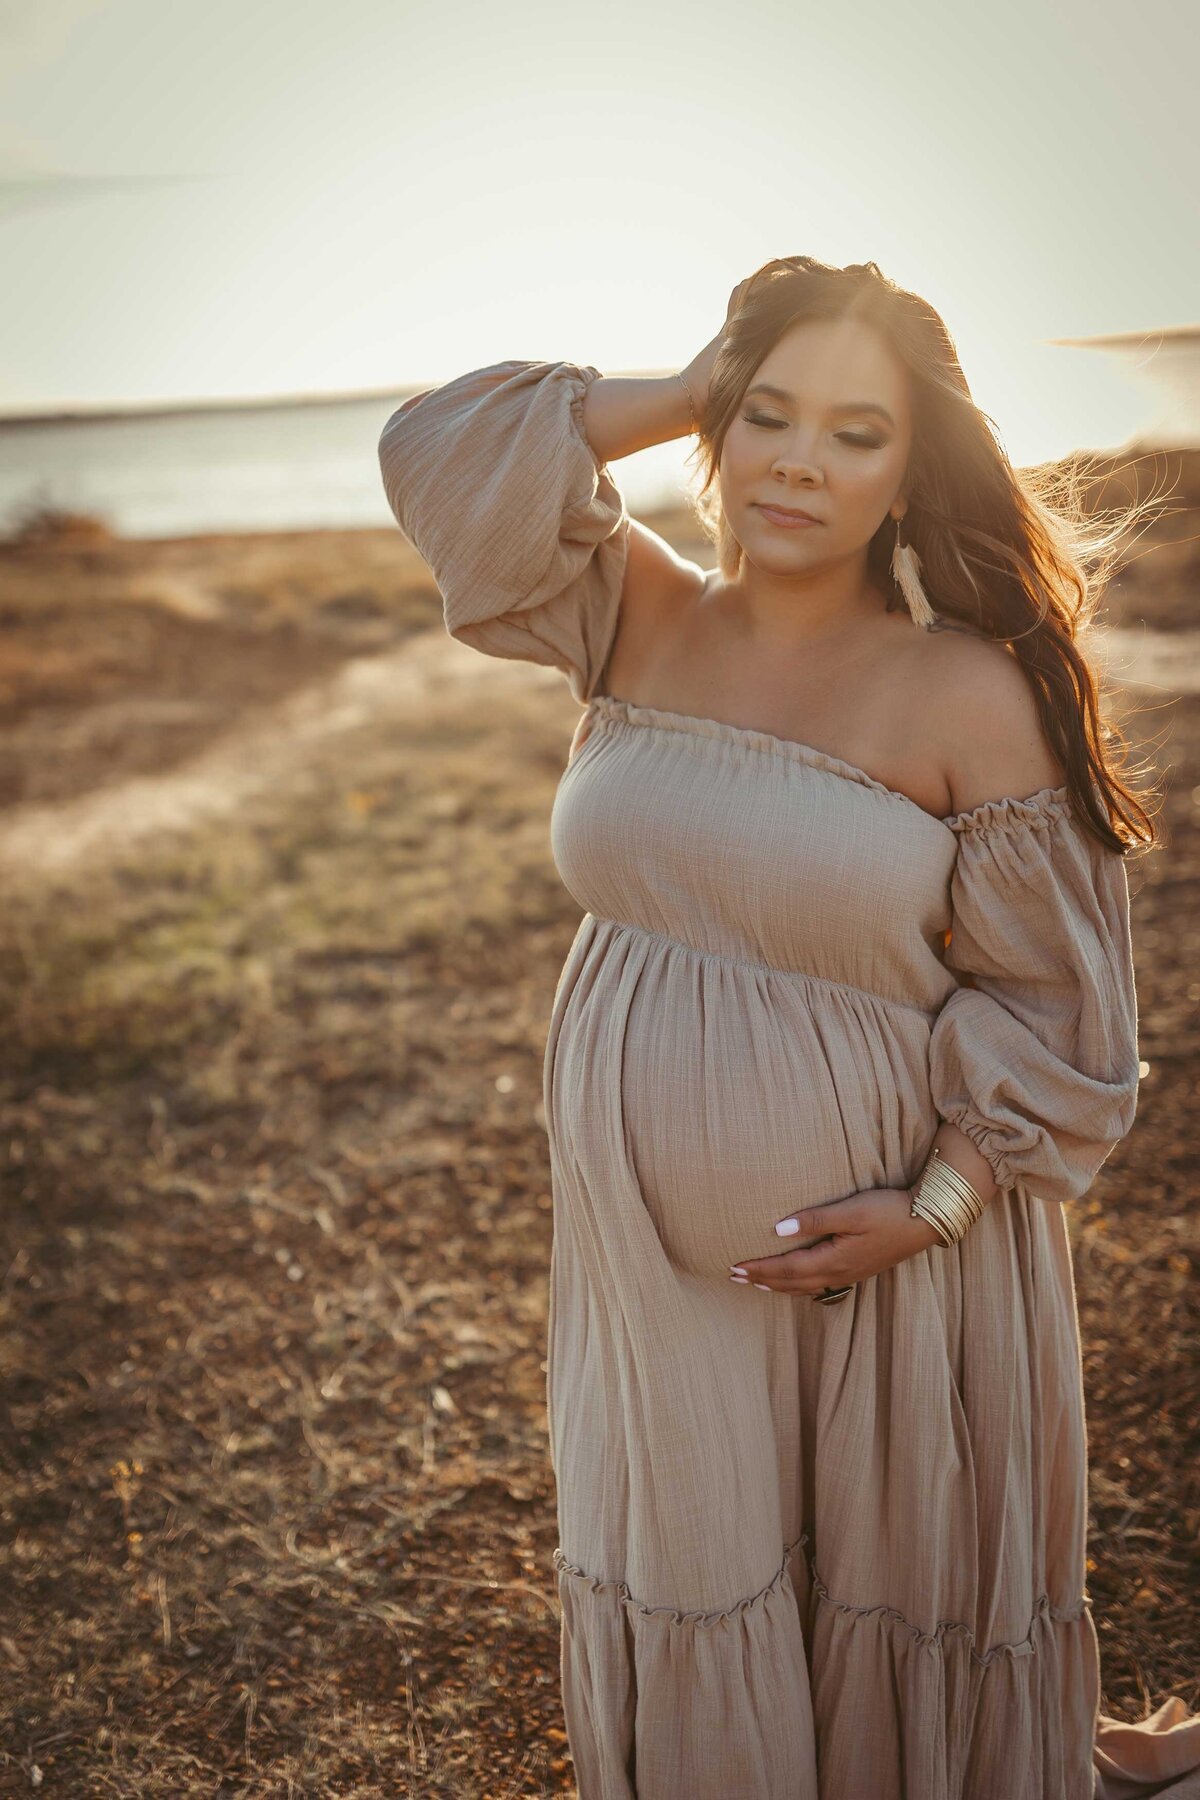 Pregnant woman standing close to the water. She is wearing a soft tan strapless dress and holding her hair with one of her hands.